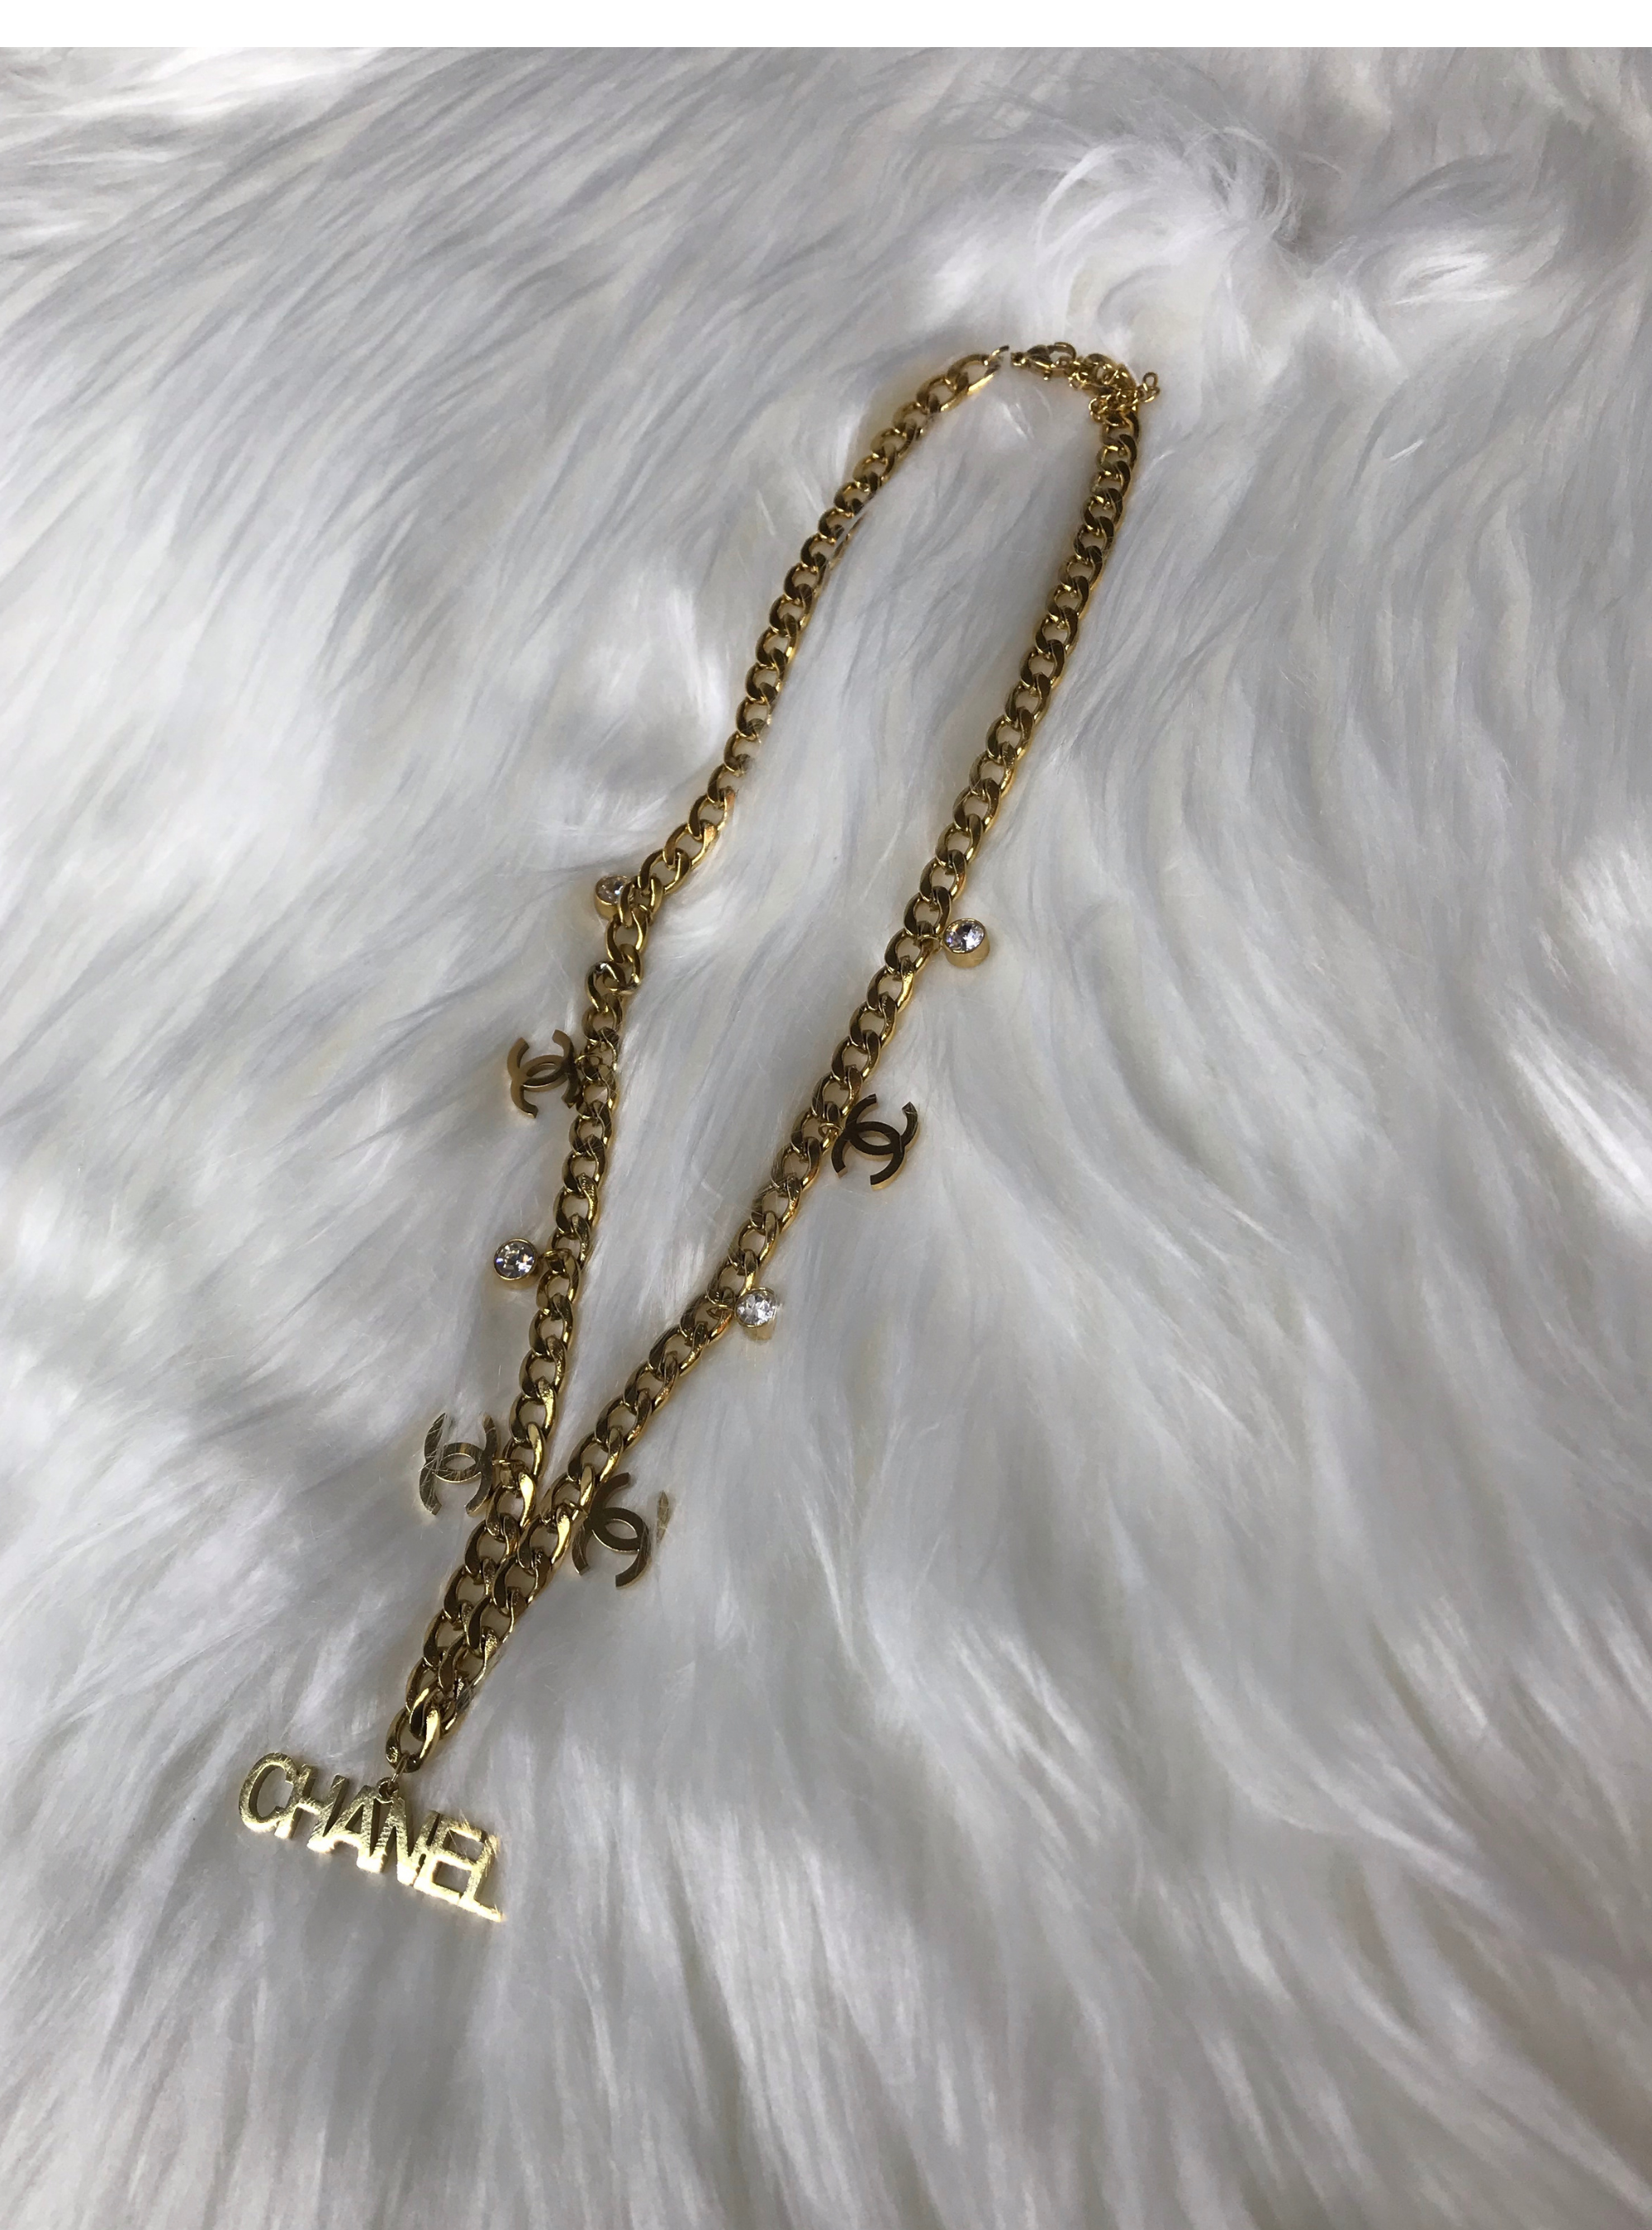 CHANEL, Jewelry, Authentic Chanel Repurposed Long Necklace